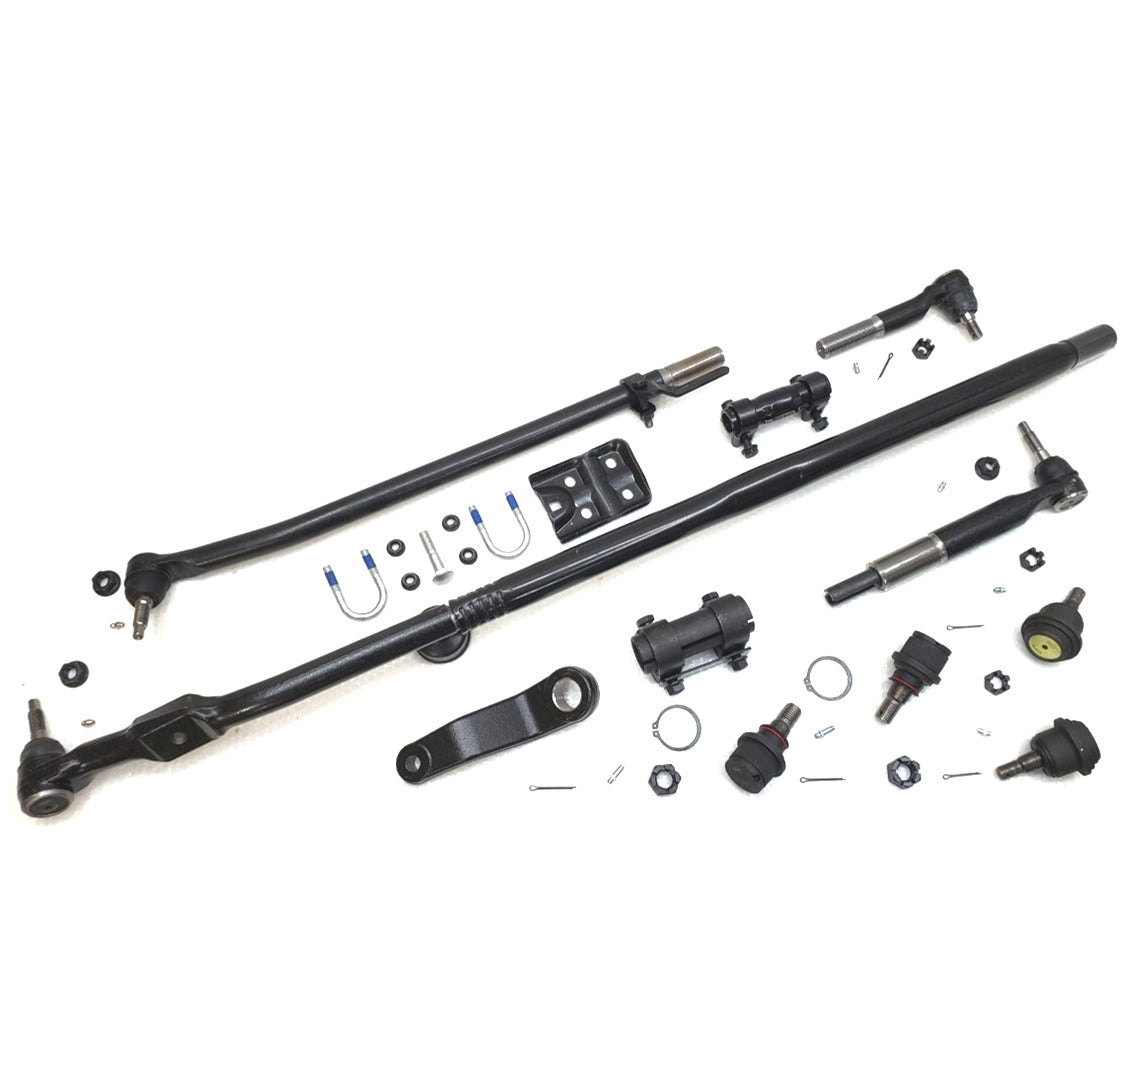 HD New T Design Upgrade Complete Kit for 2009-2012 Dodge Ram 2500, 3500 4x4